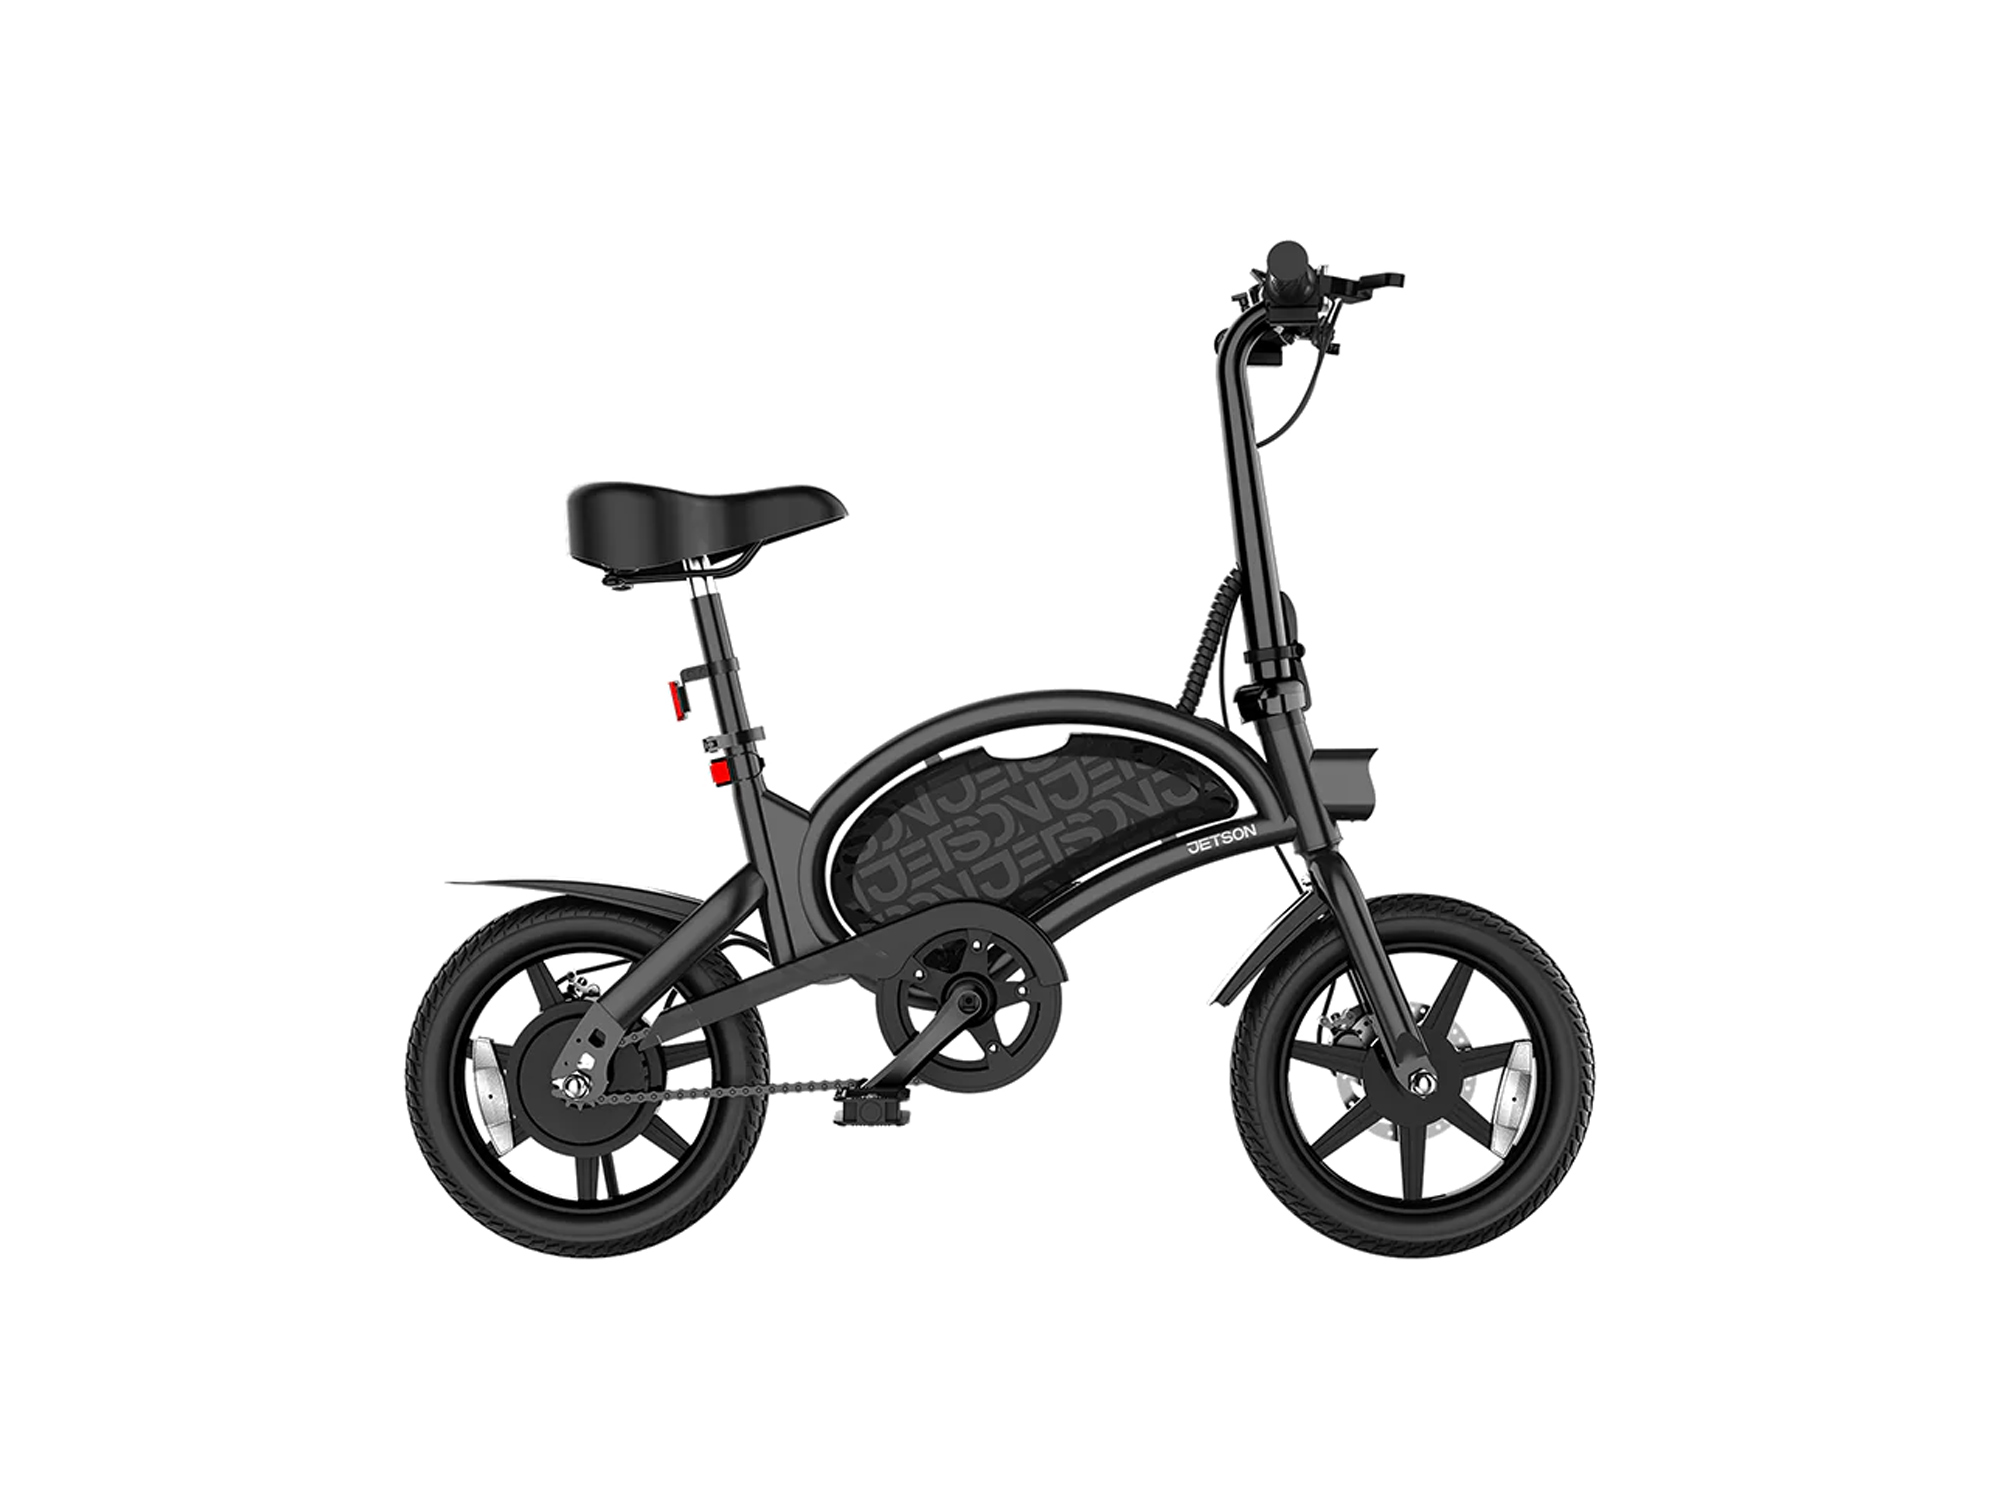 Jetson Axle 12 Foldable Step Over Electric Bike - Black